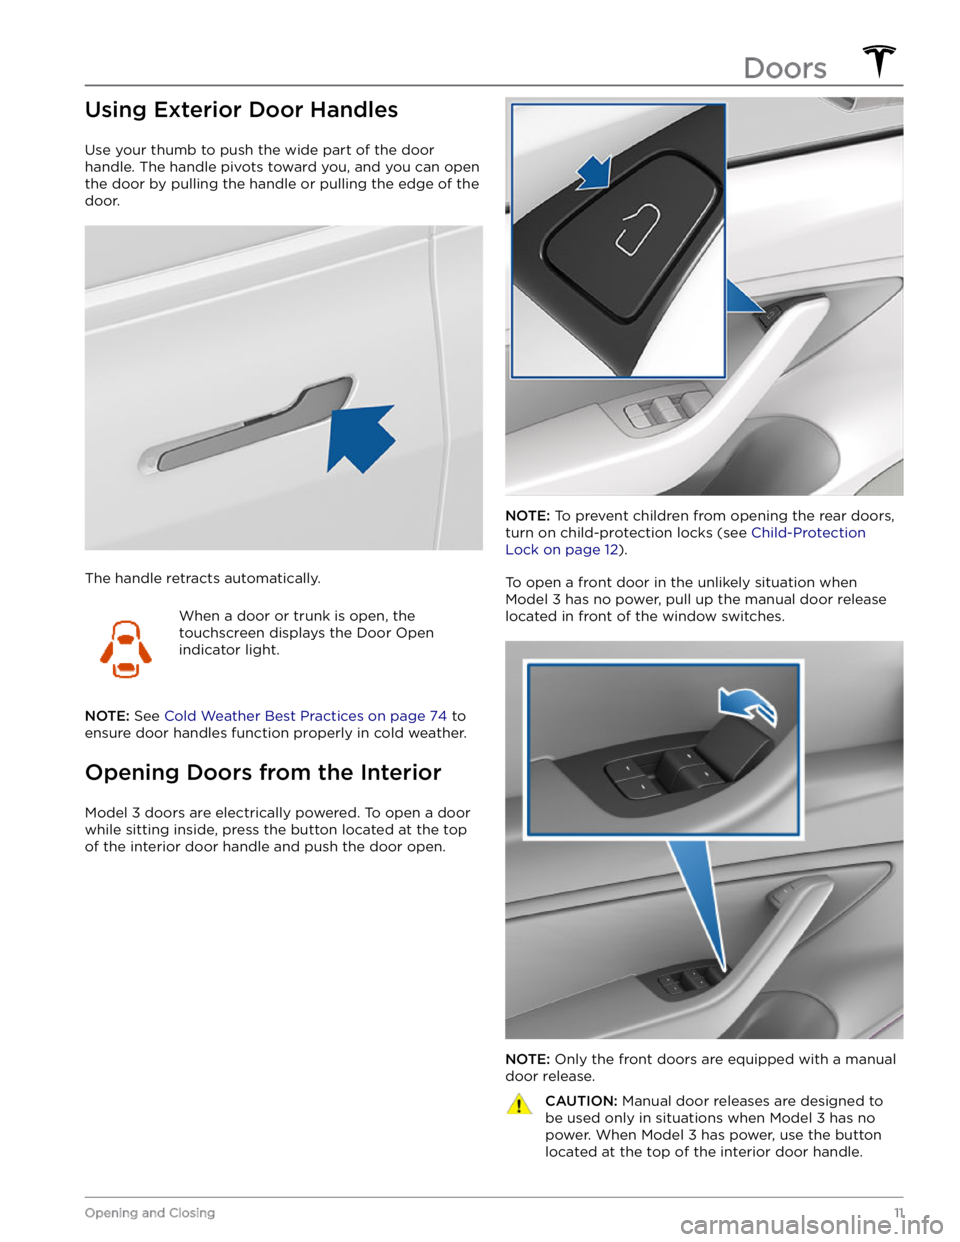 TESLA MODEL 3 2021  Owner´s Manual Using Exterior Door Handles
Use your thumb to push the wide part of the door 
handle. The handle pivots toward you, and you can open 
the door by pulling the handle or pulling the edge of the  door.
T